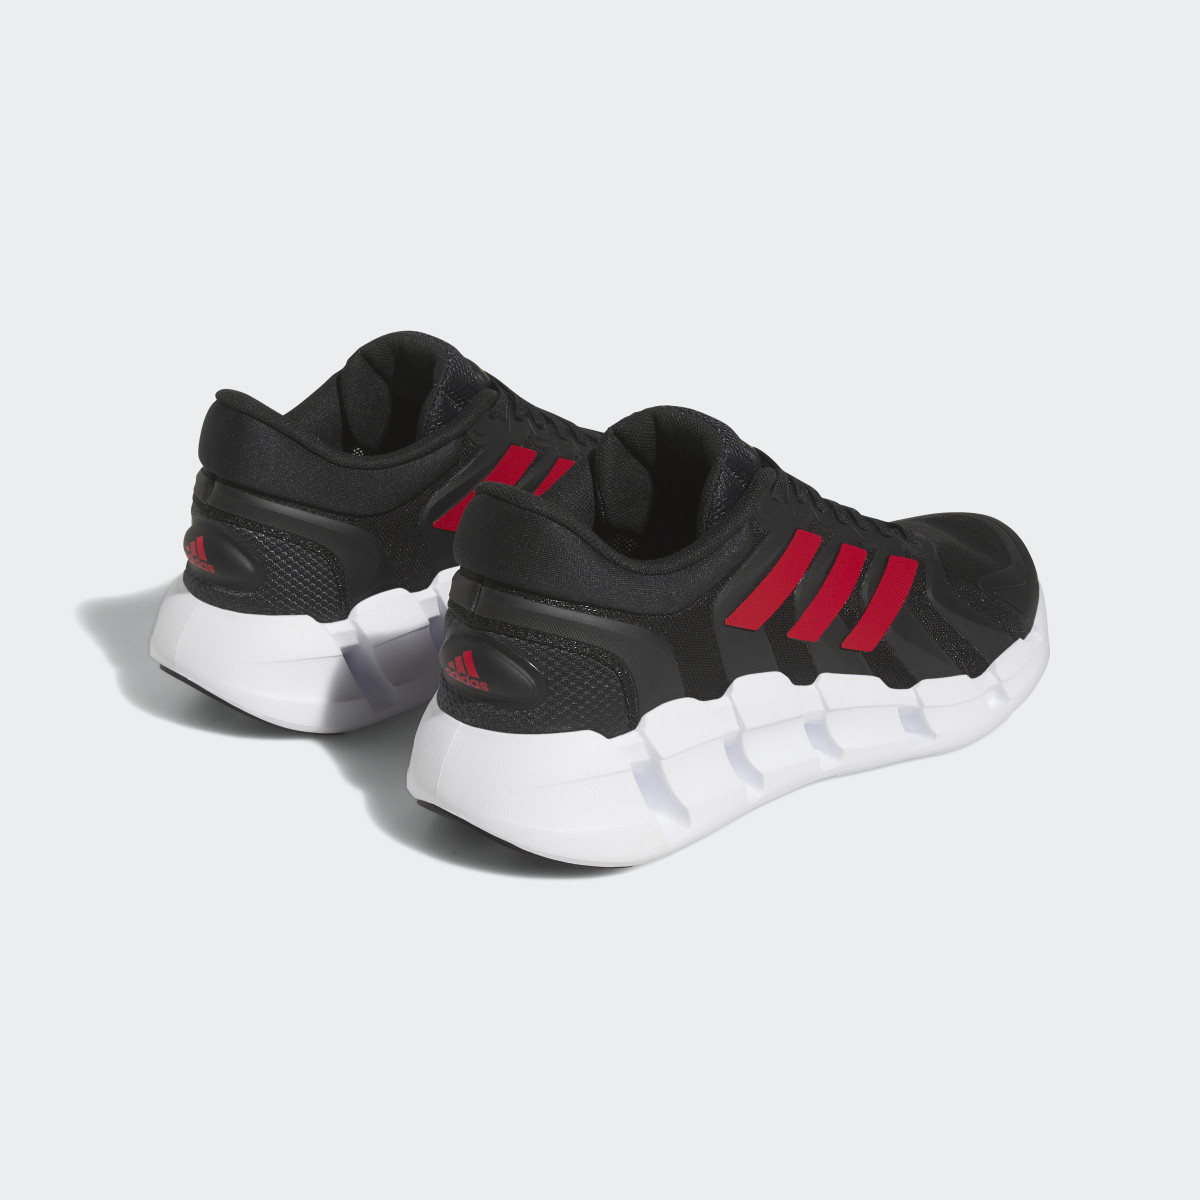 Adidas Chaussure Climacool Ventice. 6